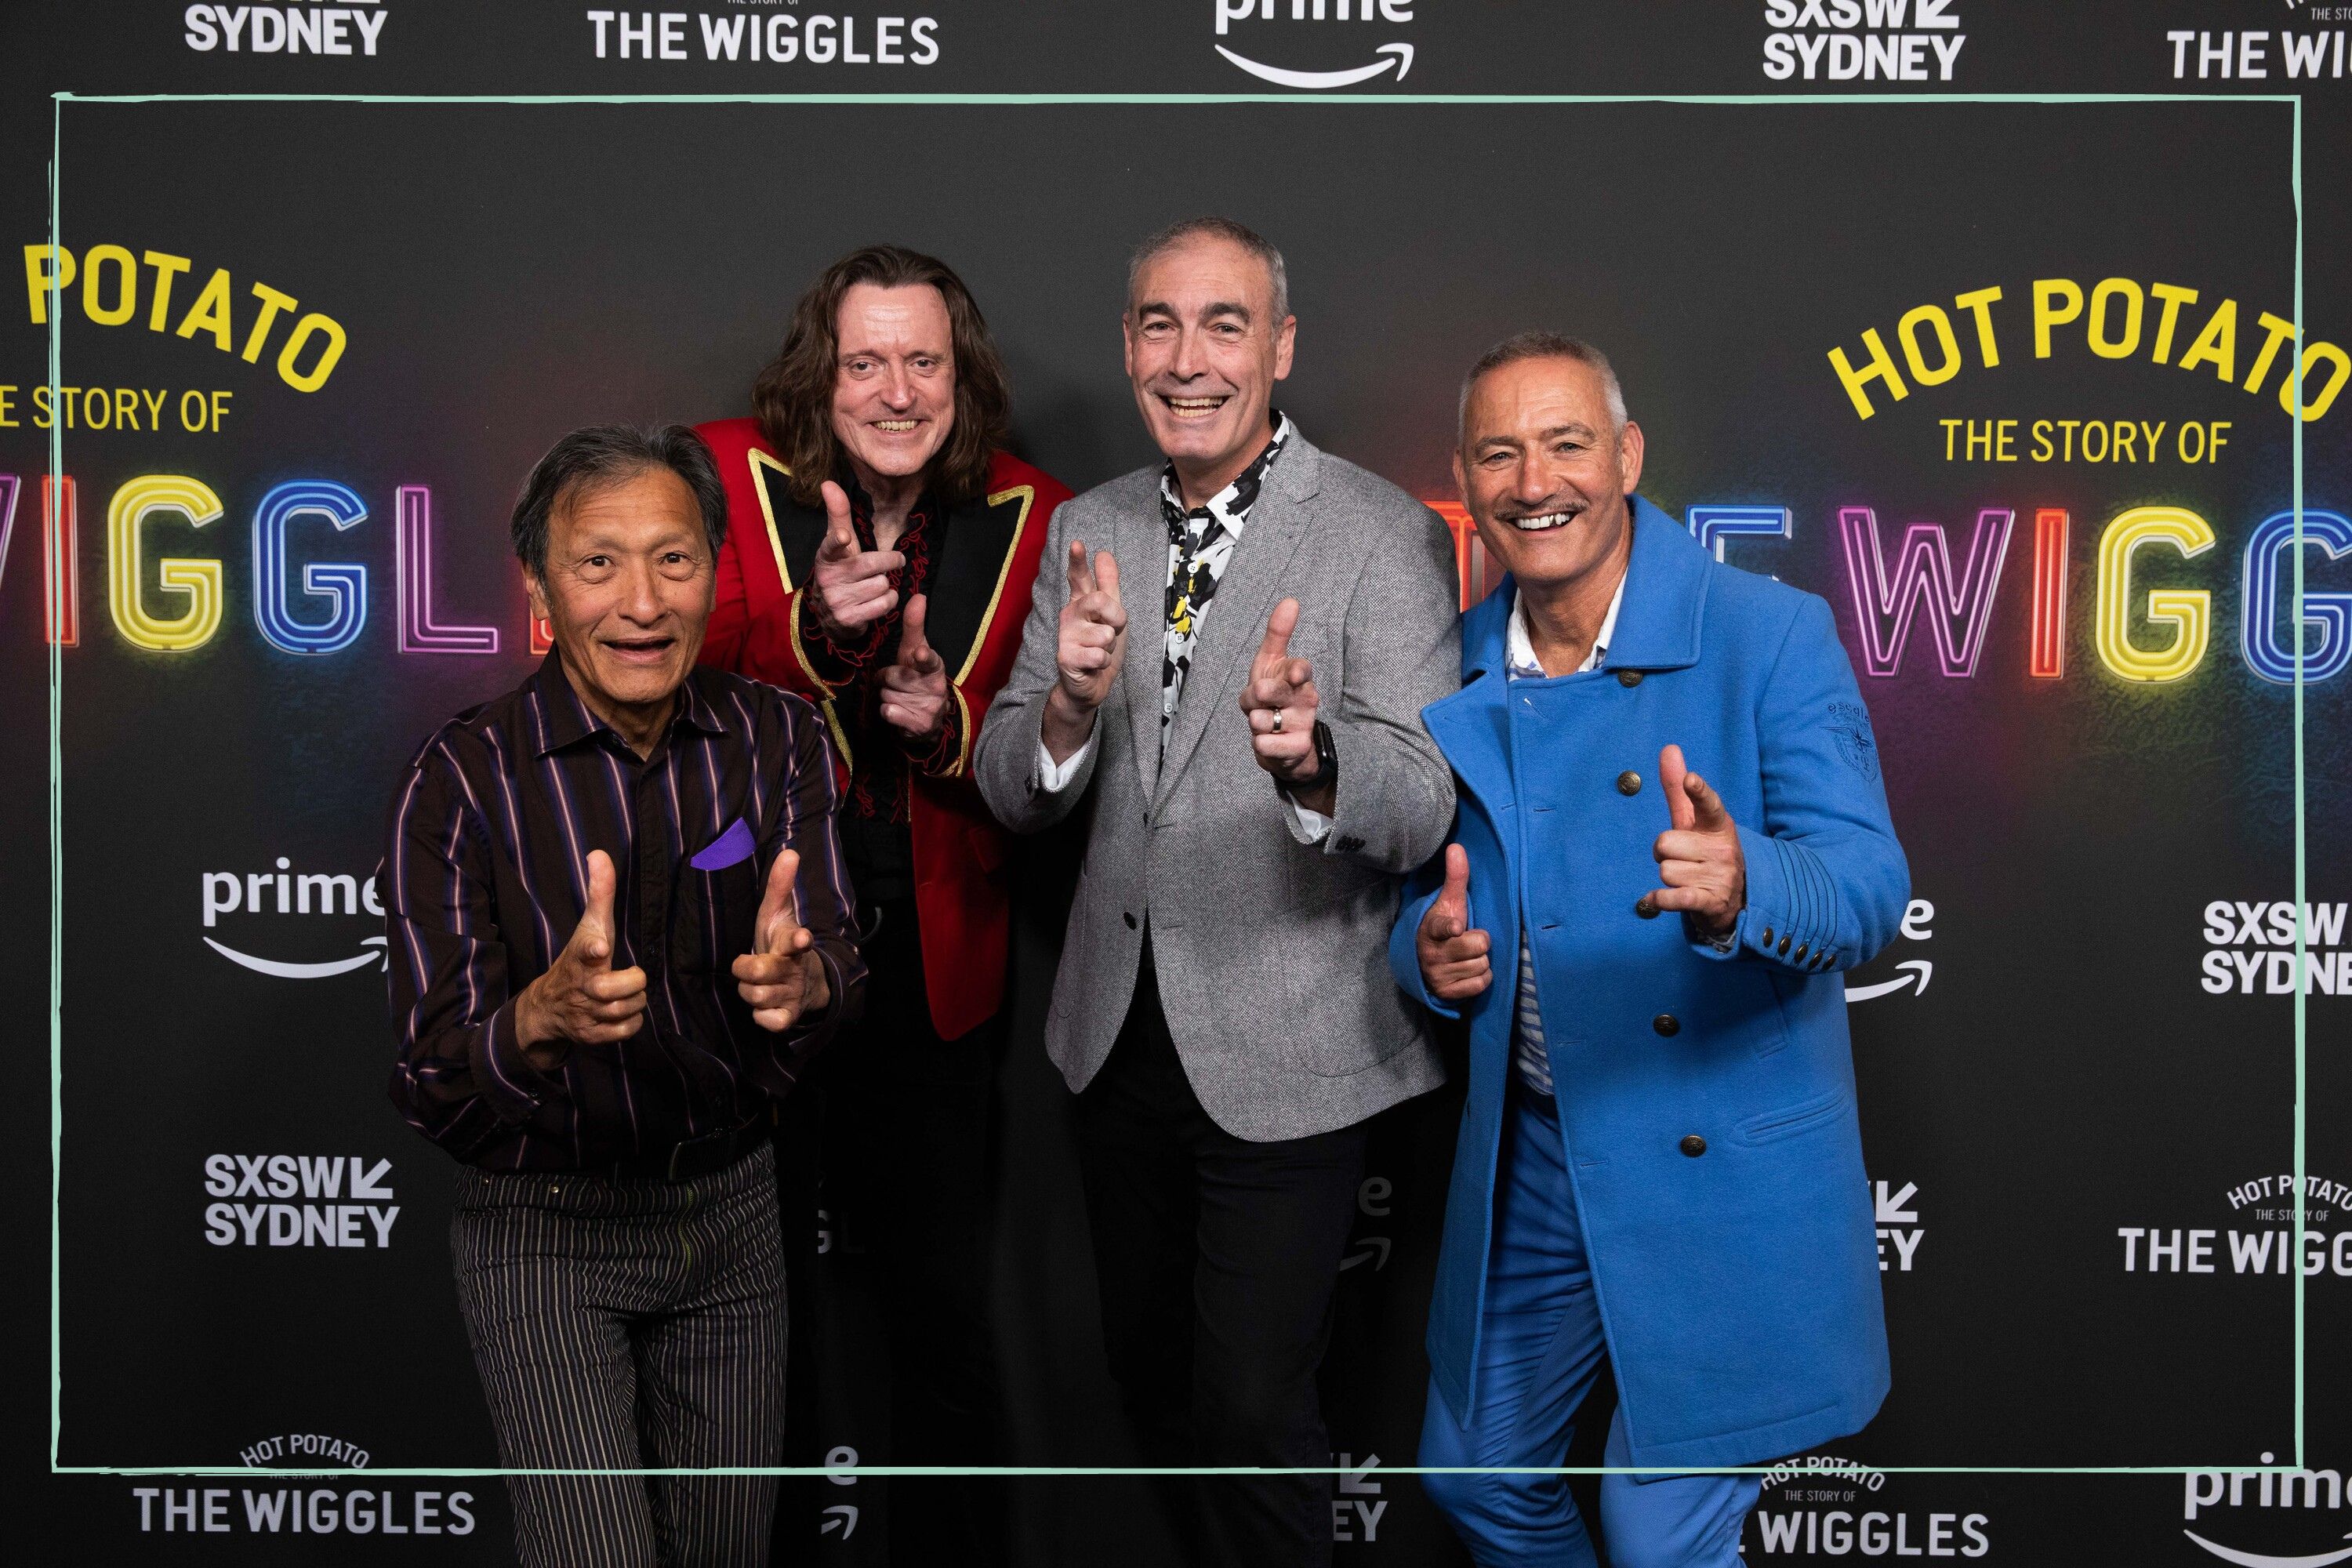 The Wiggles “World of Dance” Classes